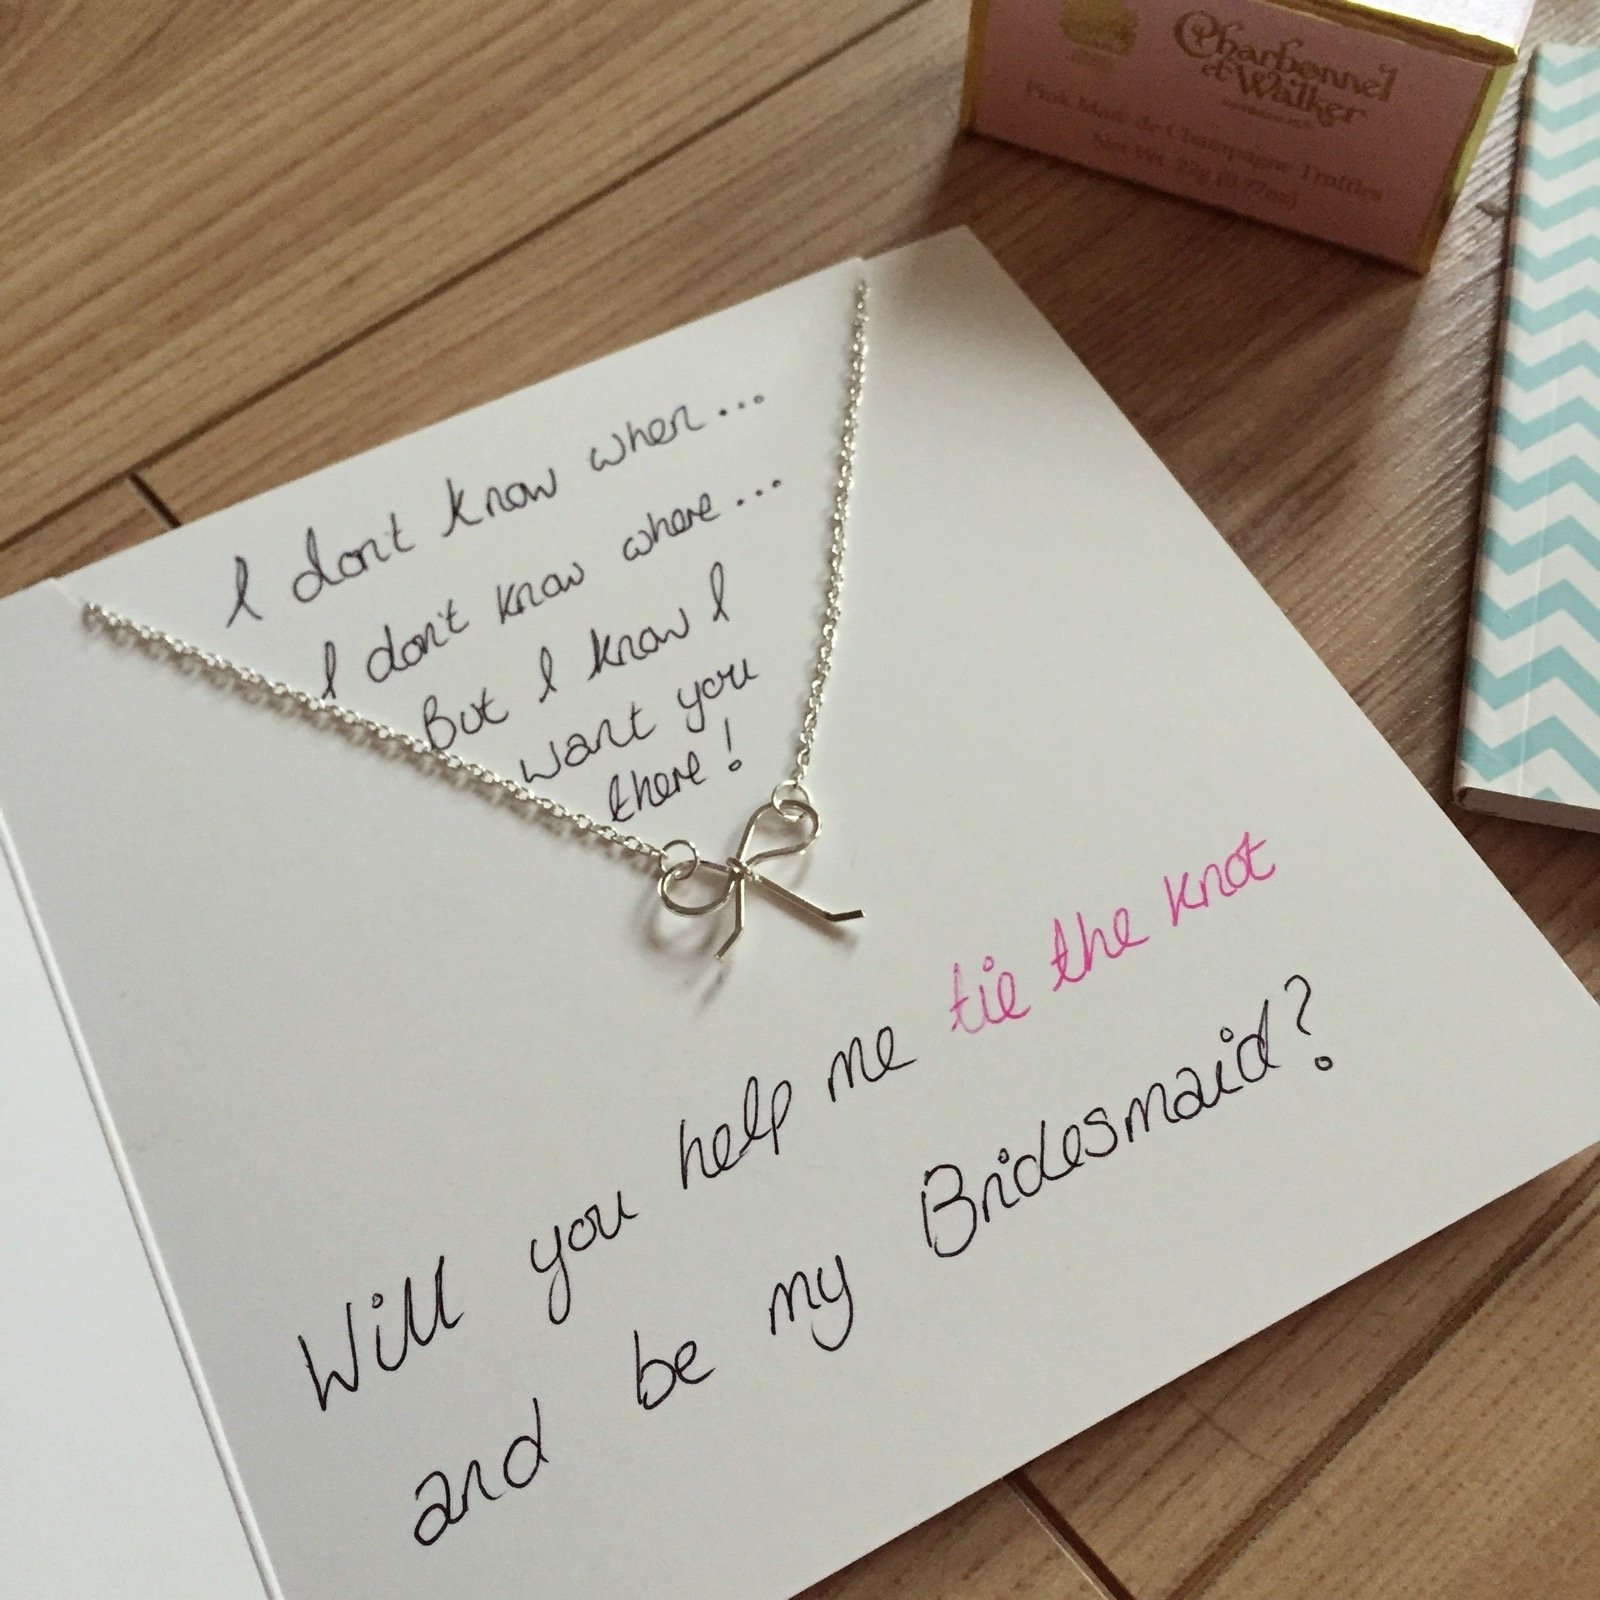 10 Great Will You Be My Bridesmaid Ideas chloes way will you be my bridesmaid gift idea 1 2022